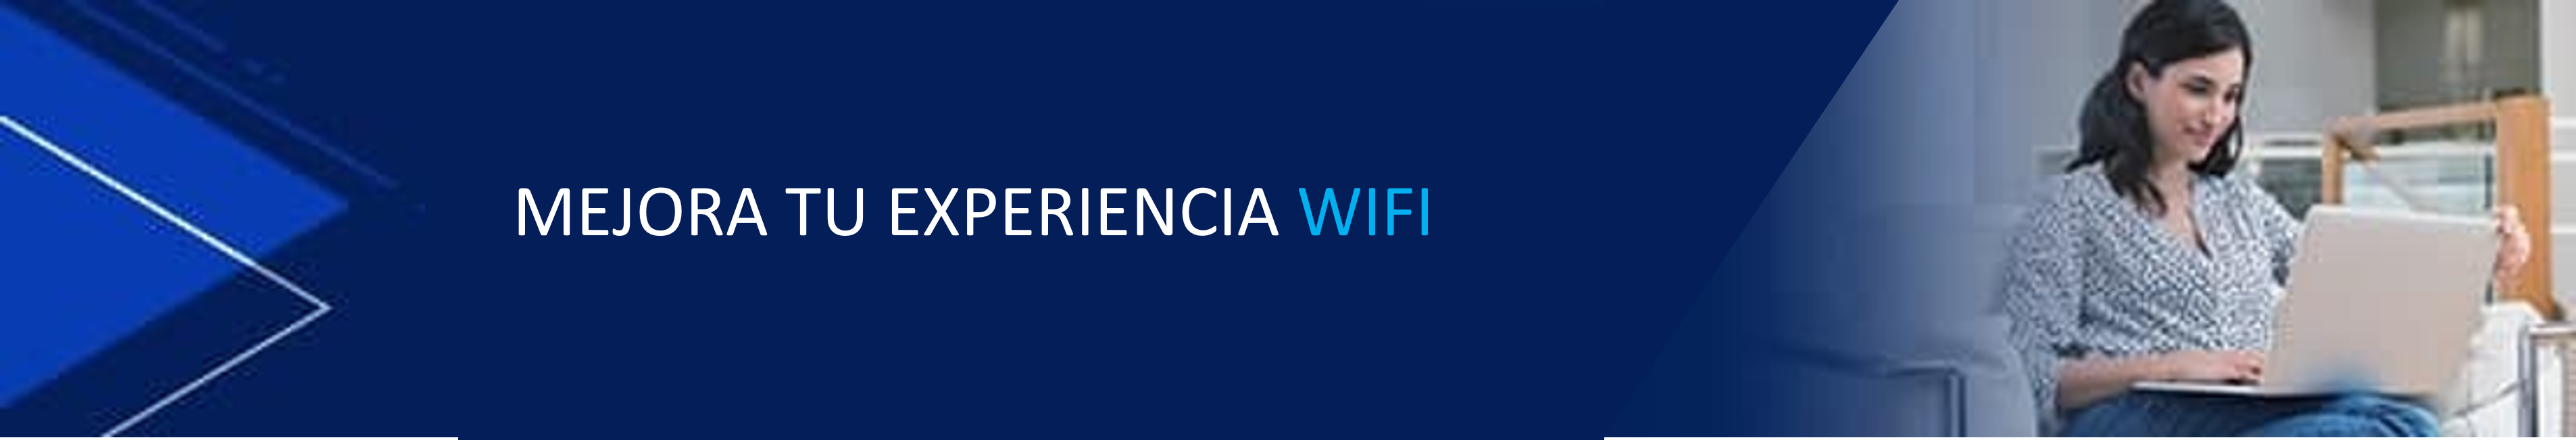 EXPERIENCIA-WIFI.png